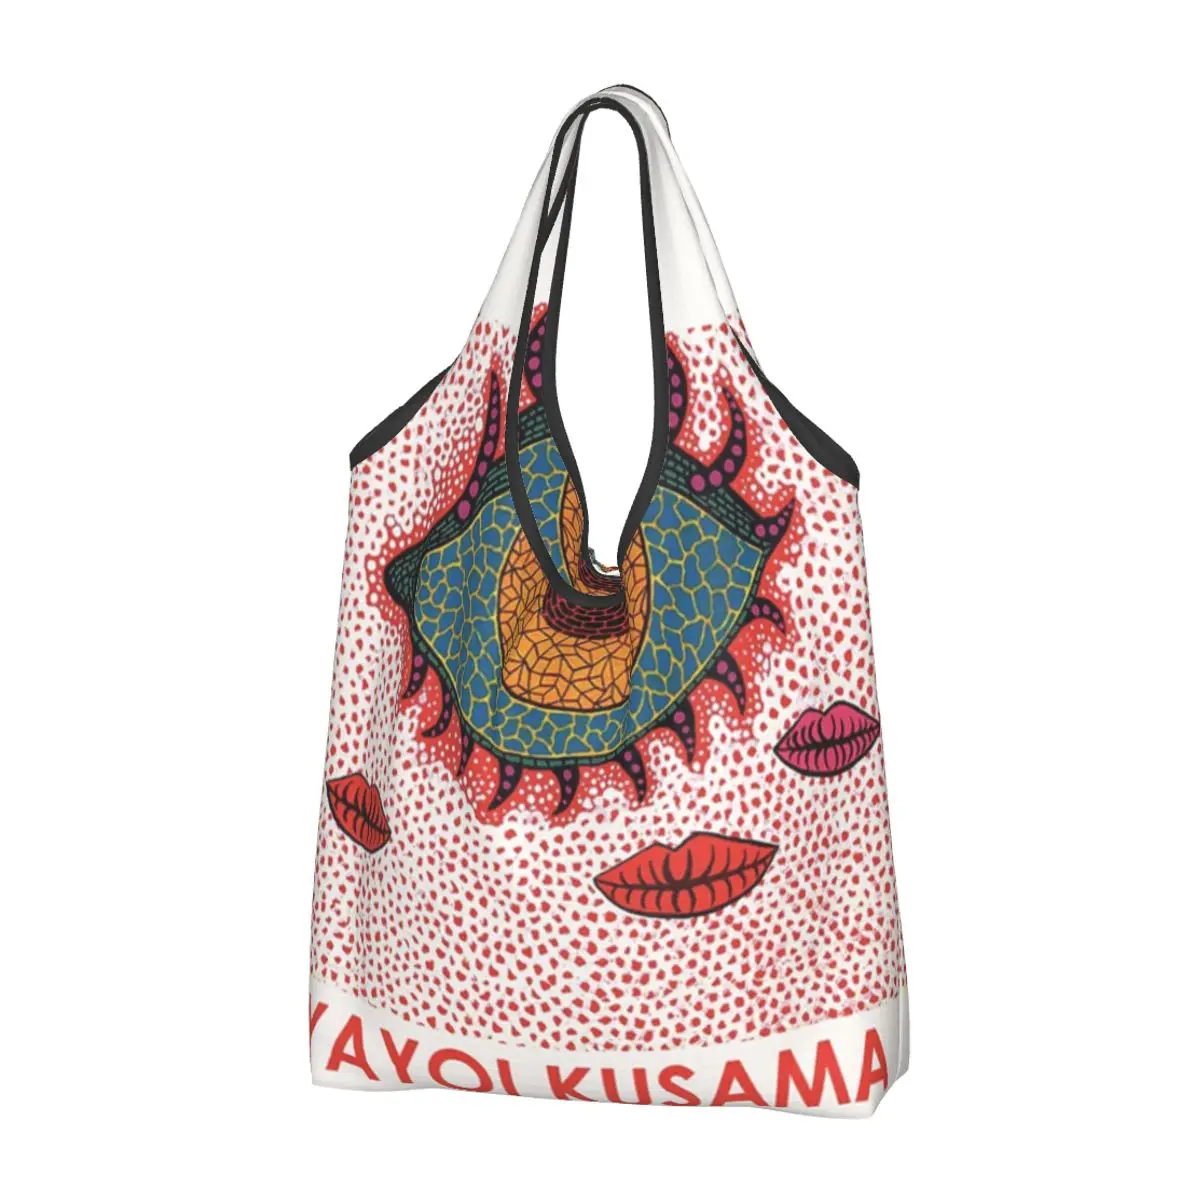 

Reusable Yayoi Kusama Japanese Shopping Bags for Groceries Foldable Art Painting Grocery Bags Washable Large Tote Bags